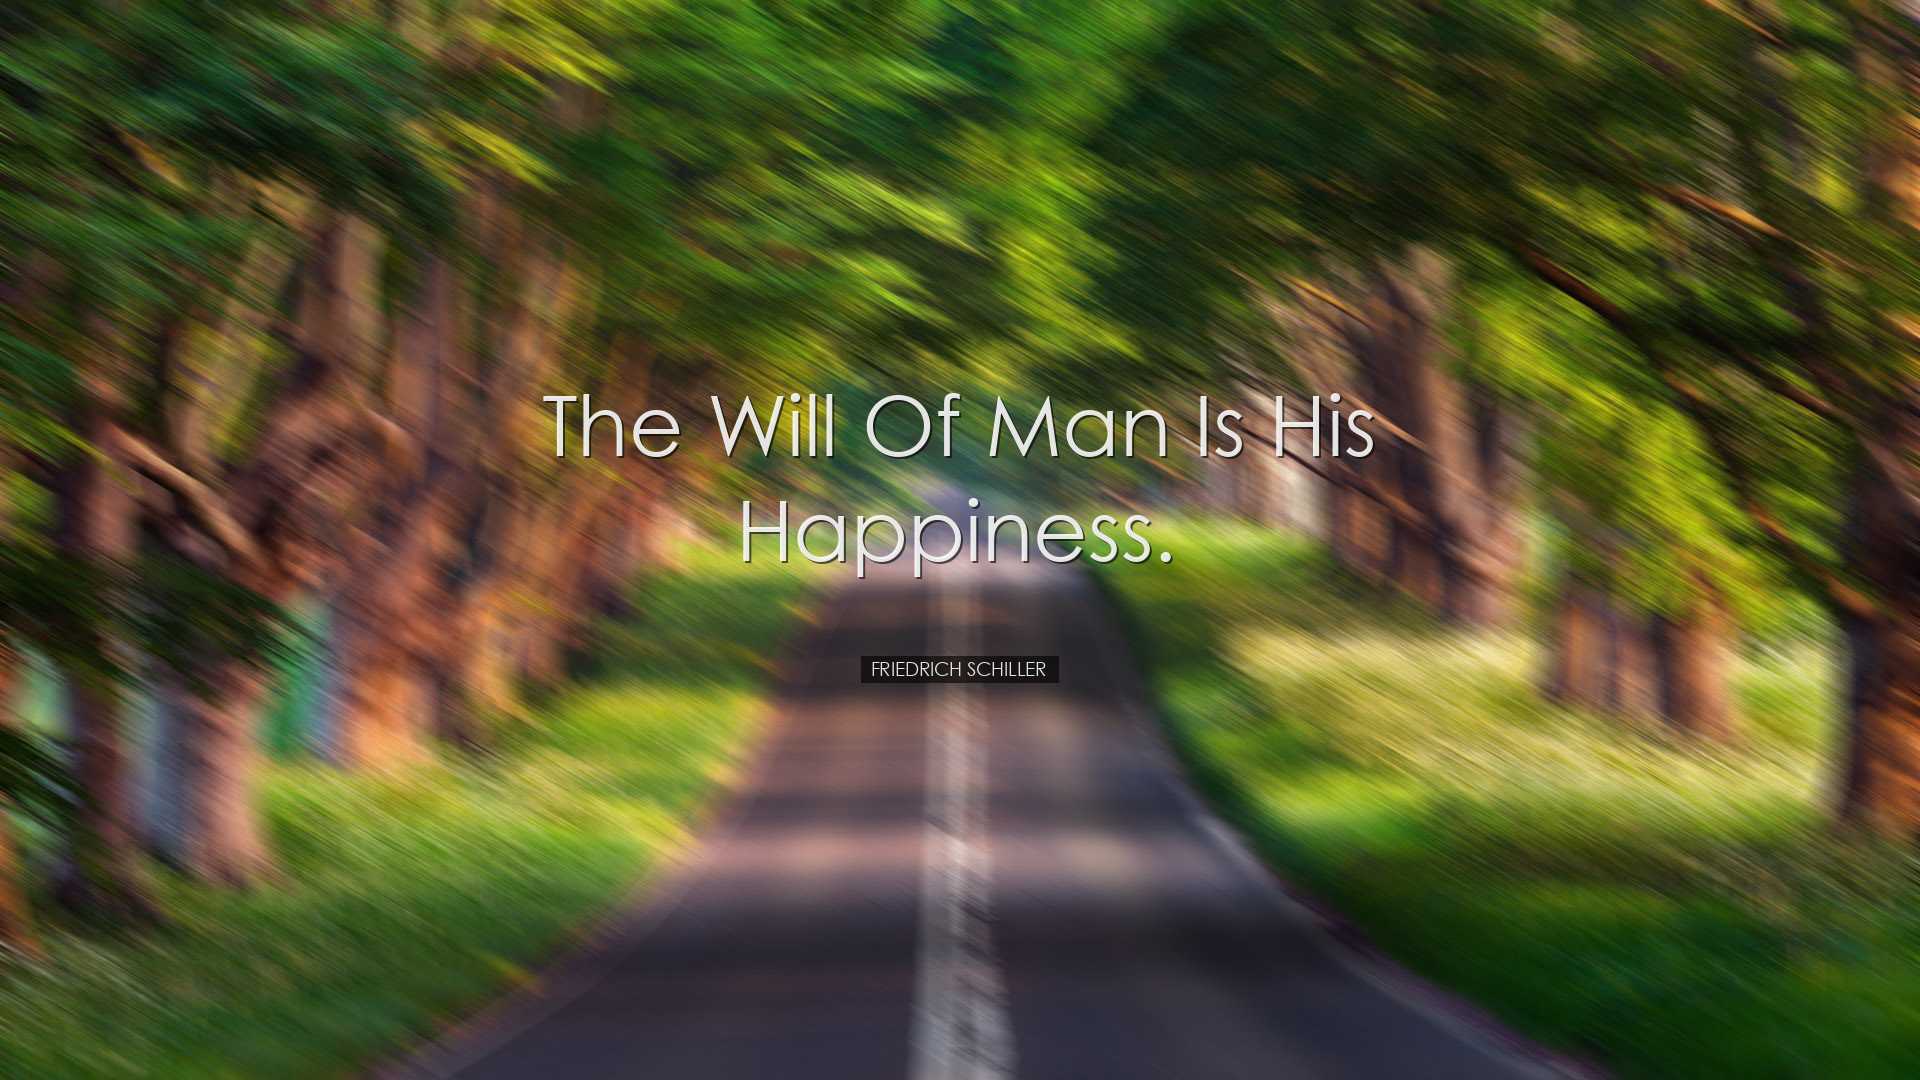 The will of man is his happiness. - Friedrich Schiller